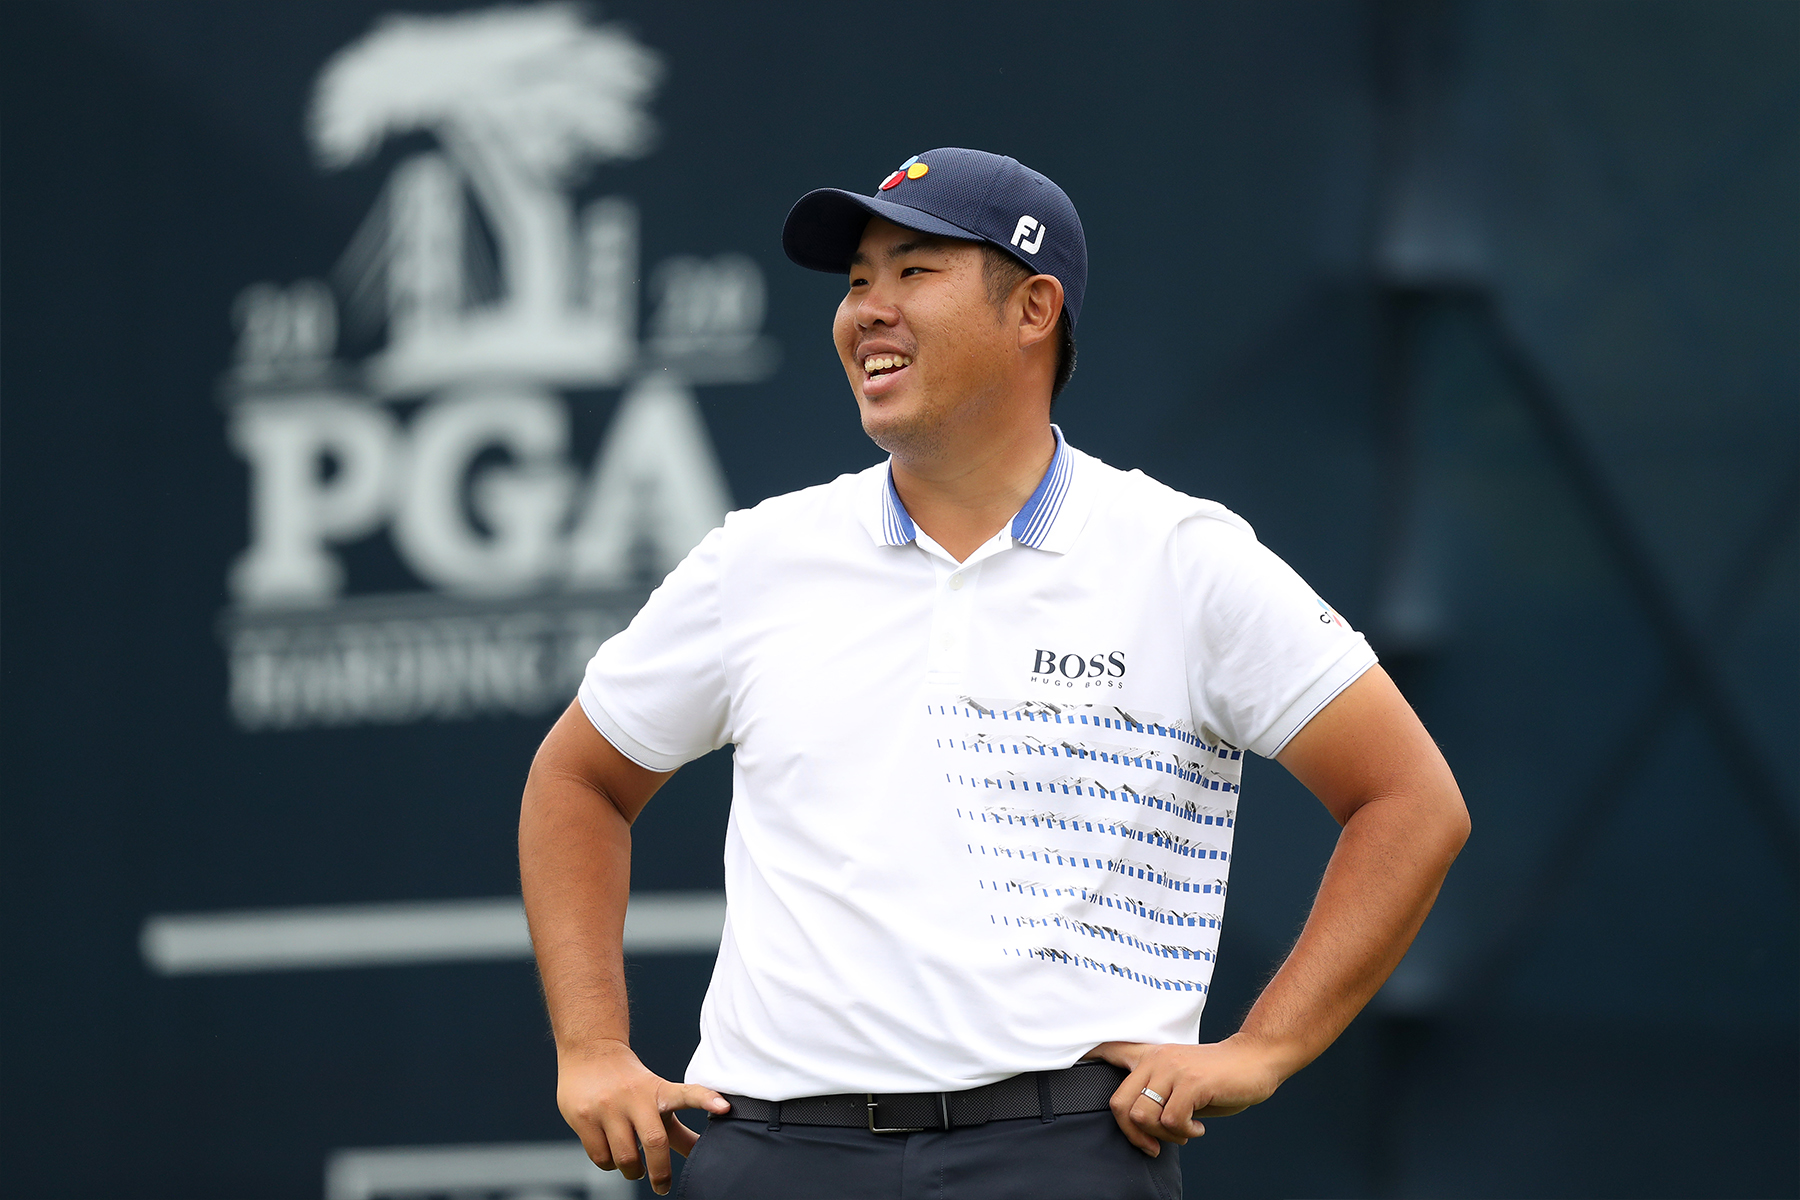 Byeong Hun An's Amazing Hole-in-One at the 2020 PGA Championship